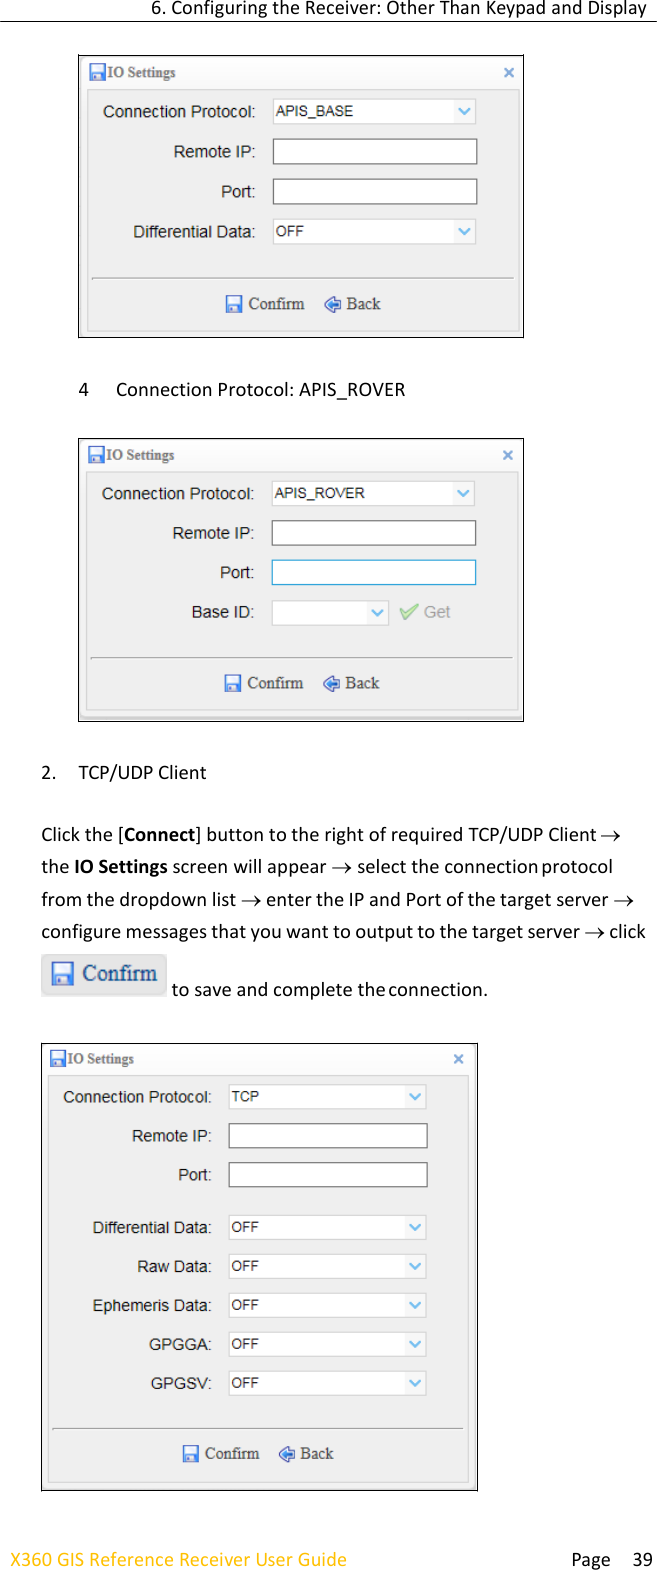 6. Configuring the Receiver: Other Than Keypad and Display  Page 39 X360 GIS Reference Receiver User Guide      4 Connection Protocol: APIS_ROVER    2. TCP/UDP Client  Click the [Connect] button to the right of required TCP/UDP Client  the IO Settings screen will appear select the connection protocol from the dropdown list enter the IP and Port of the target server  configure messages that you want to output to the target server click  to save and complete the connection.          